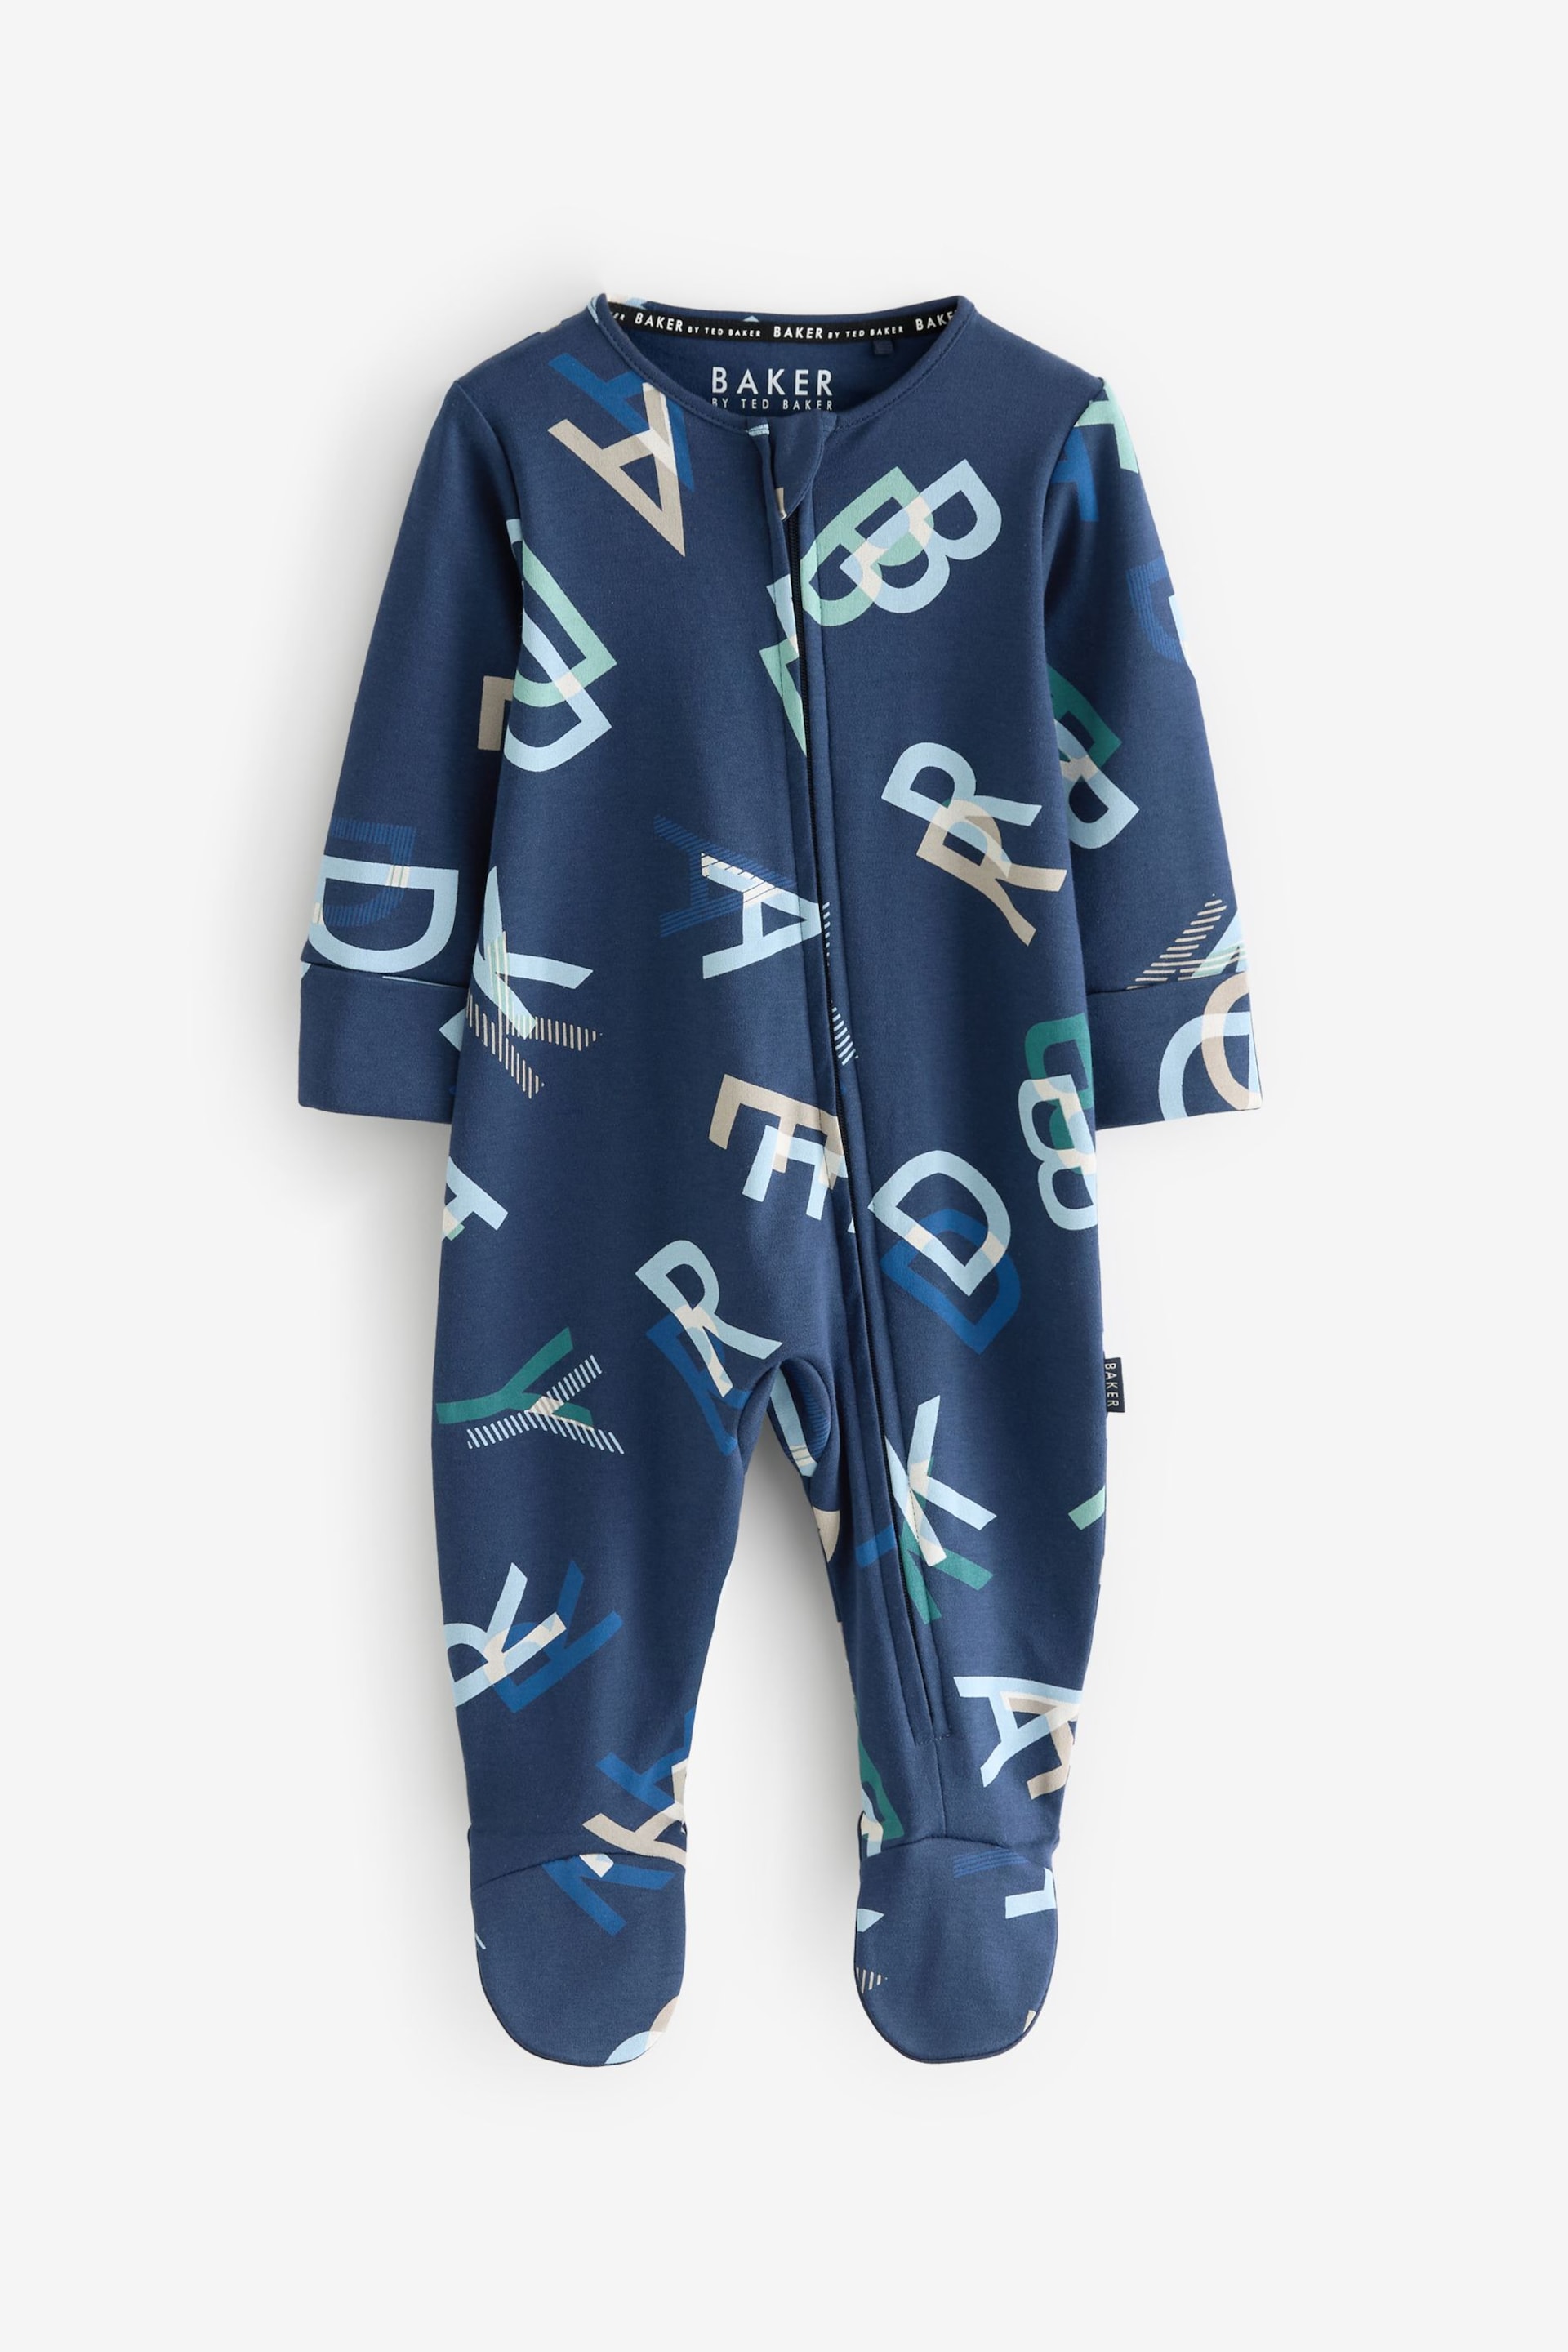 Baker by Ted Baker Sleepsuit 3 Pack - Image 2 of 7